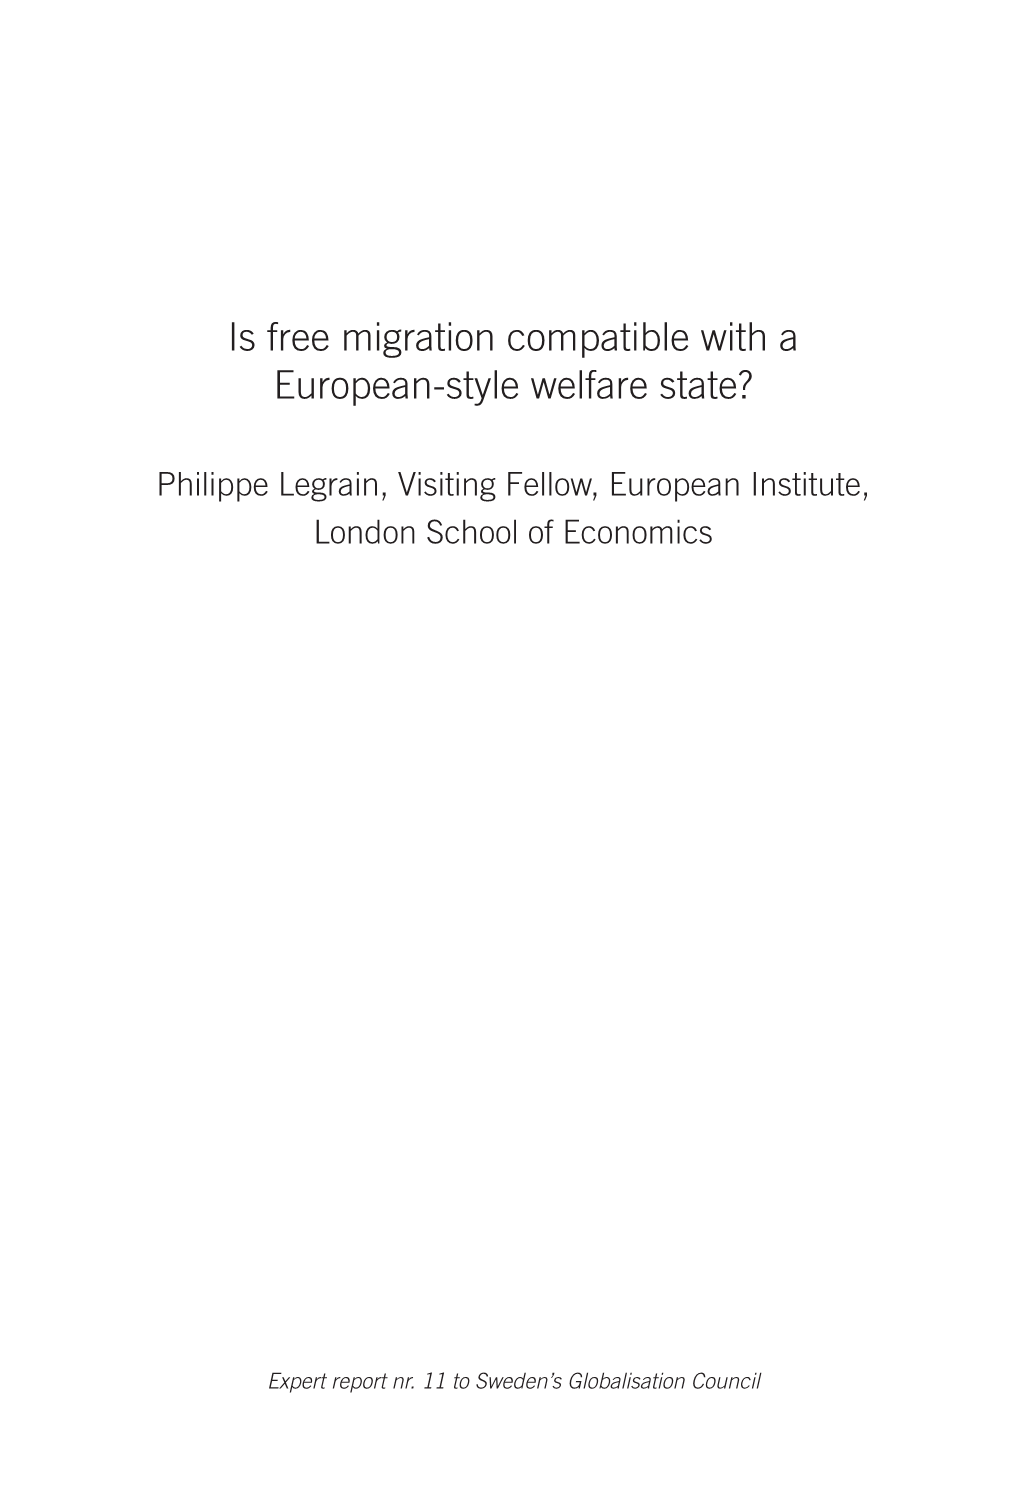 Is Free Migration Compatible with a European-Style Welfare State?